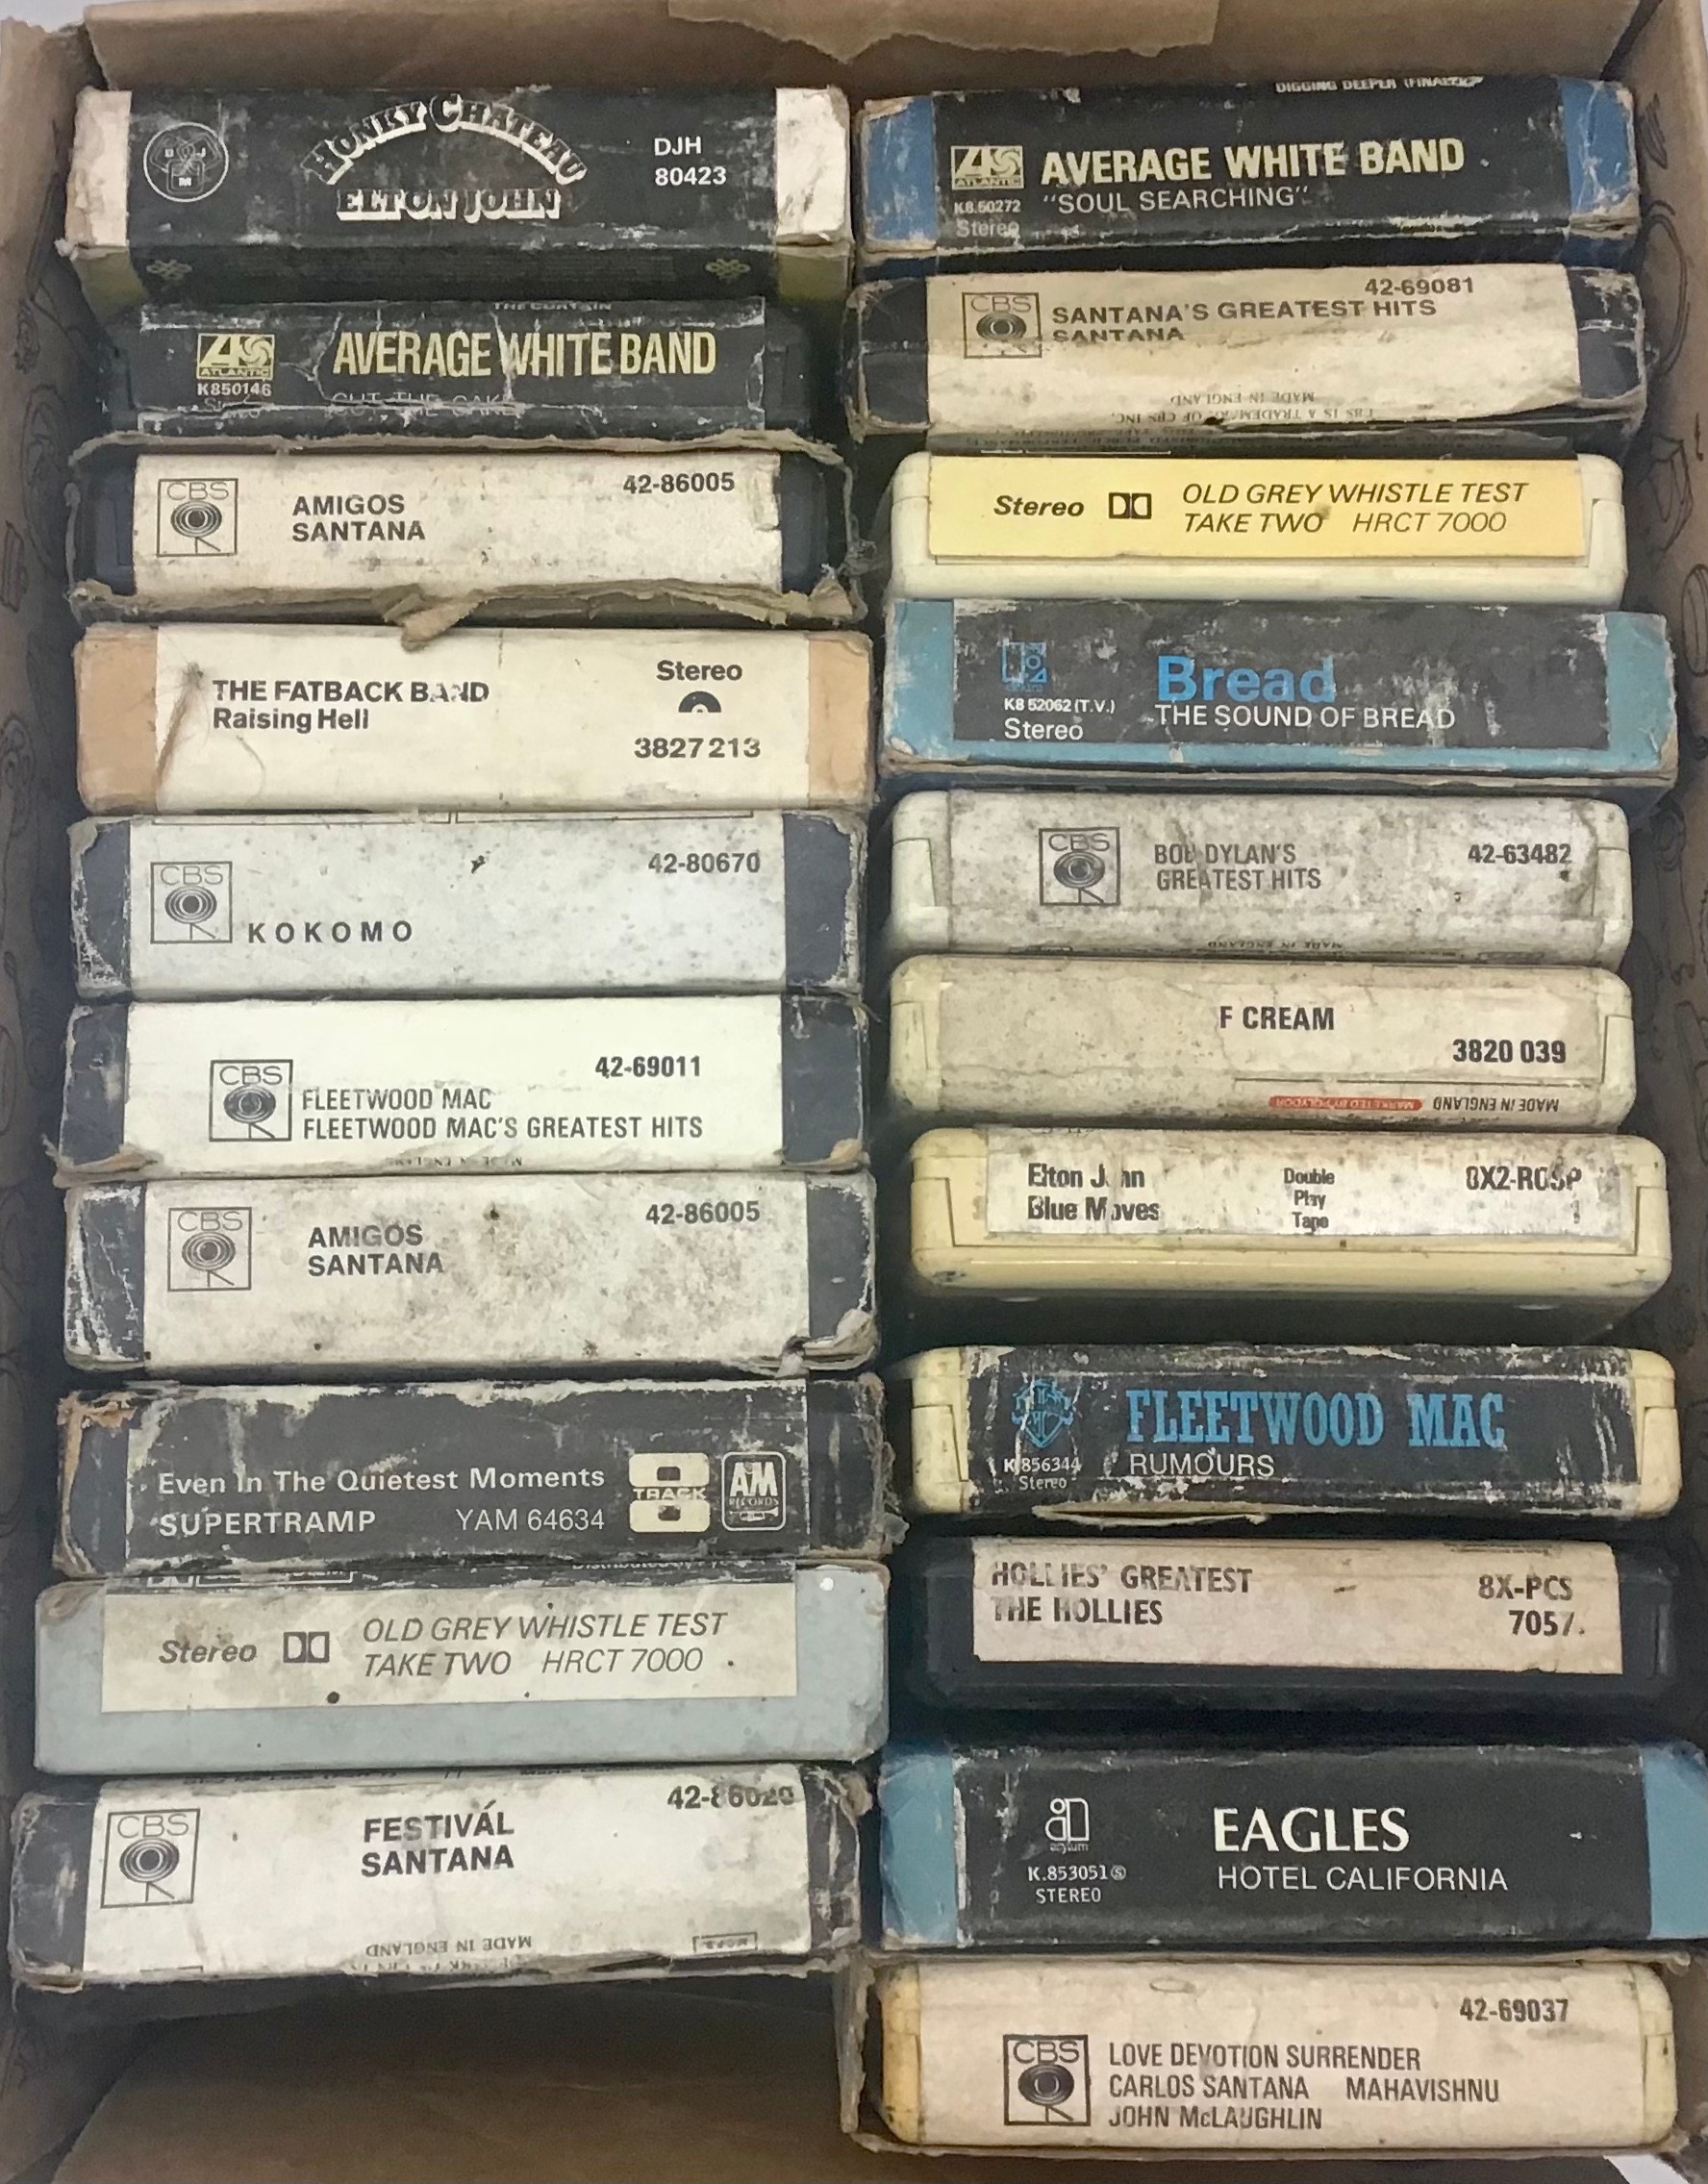 SELECTION OF 8 TRACK CARTRIDGE TAPES. In total we have a box of 21 including artists - Eagles -